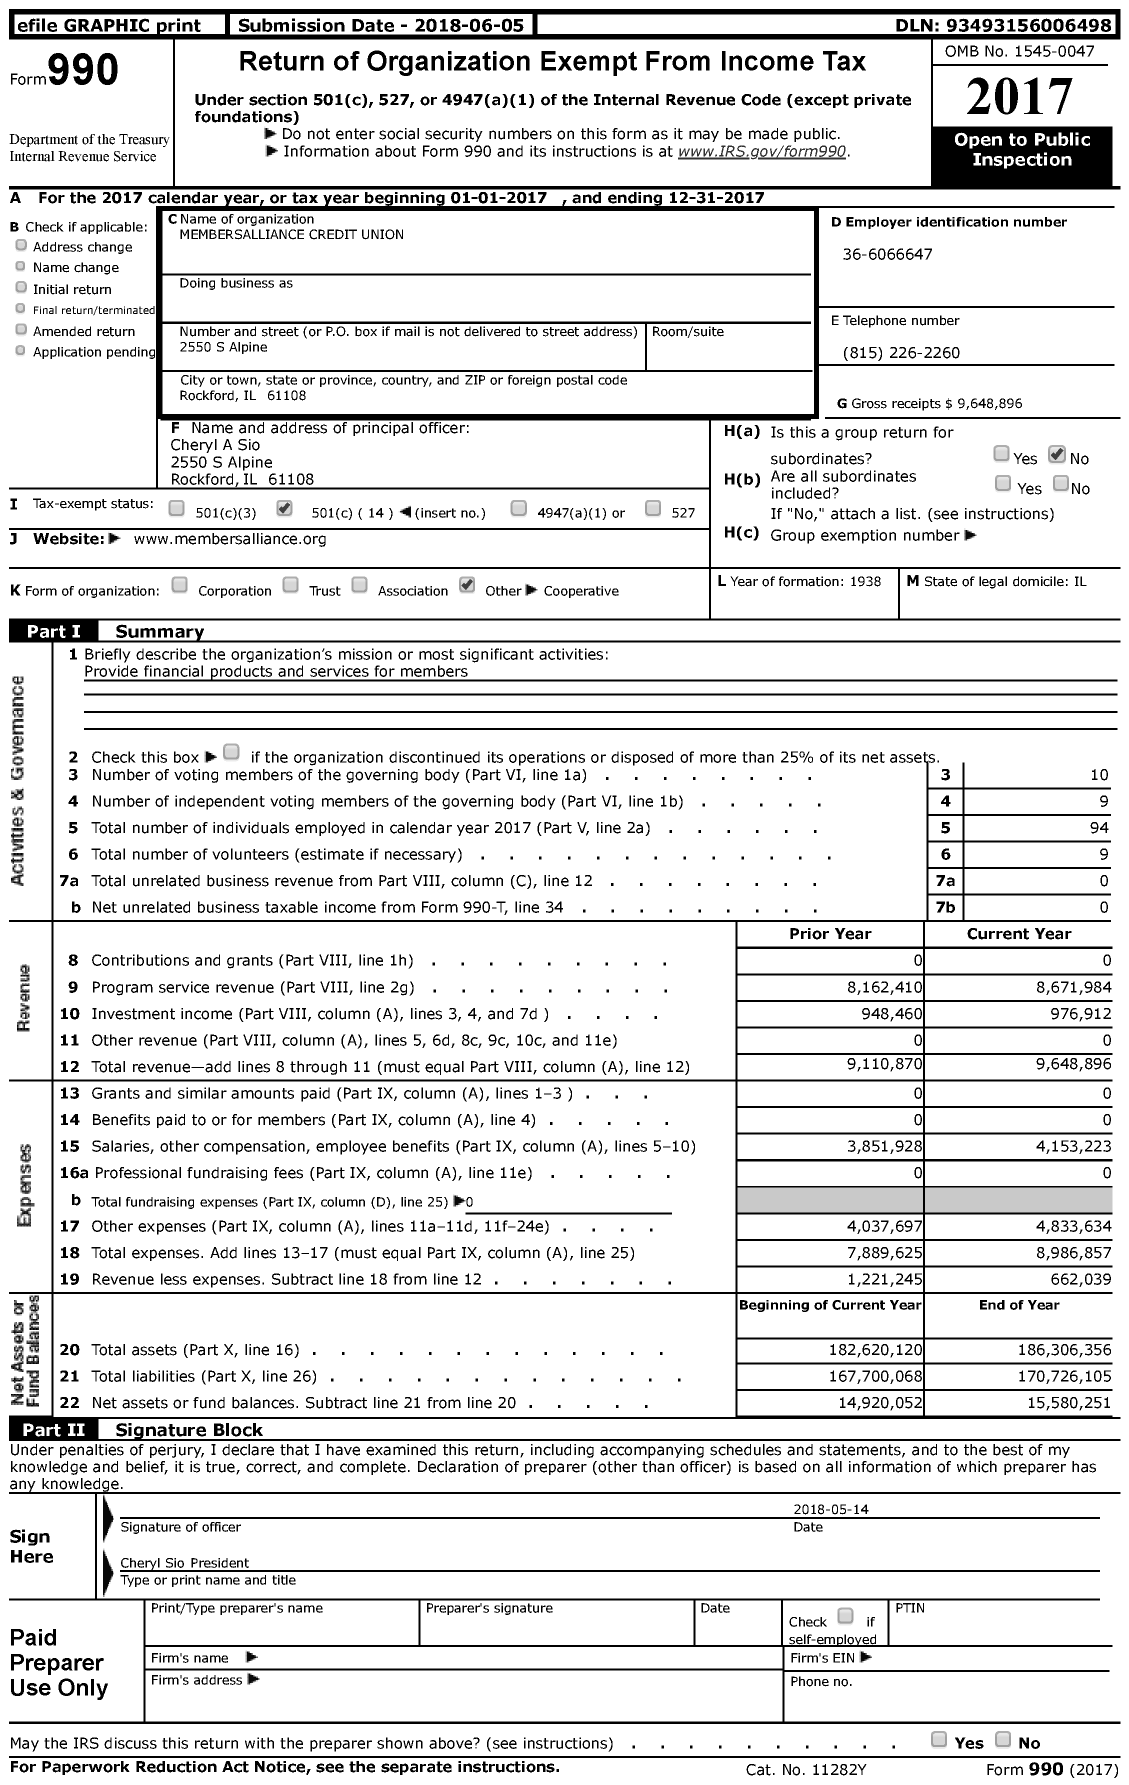 Image of first page of 2017 Form 990 for Membersalliance Credit Union